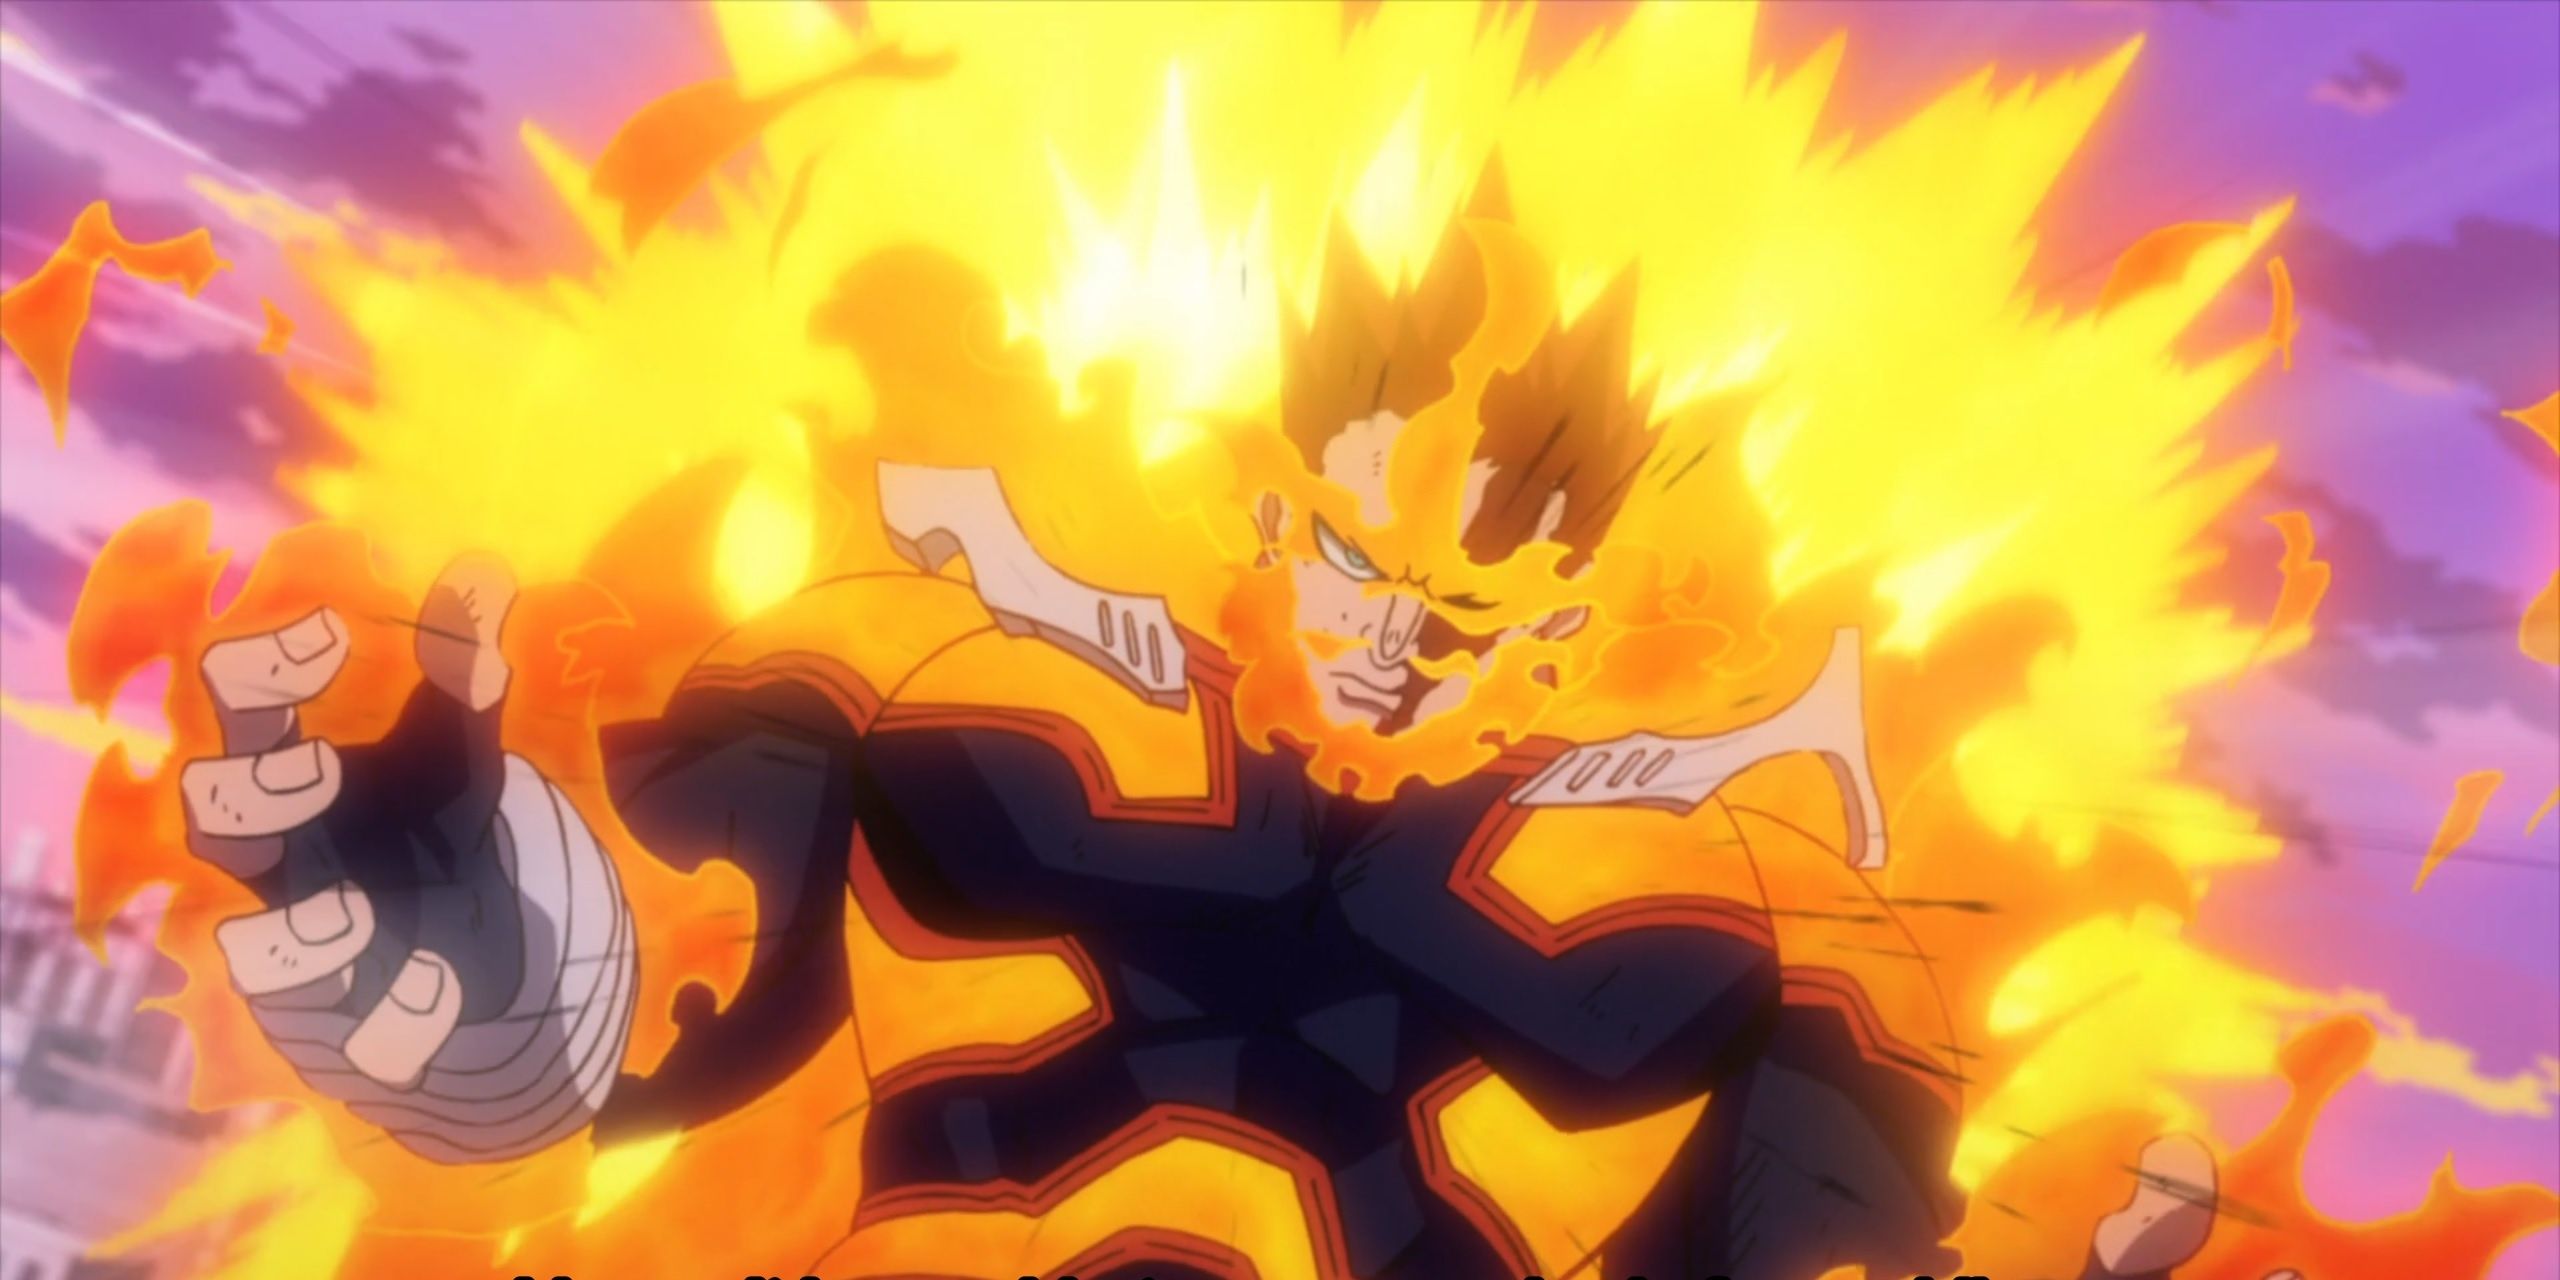  Endeavor using his fire powers